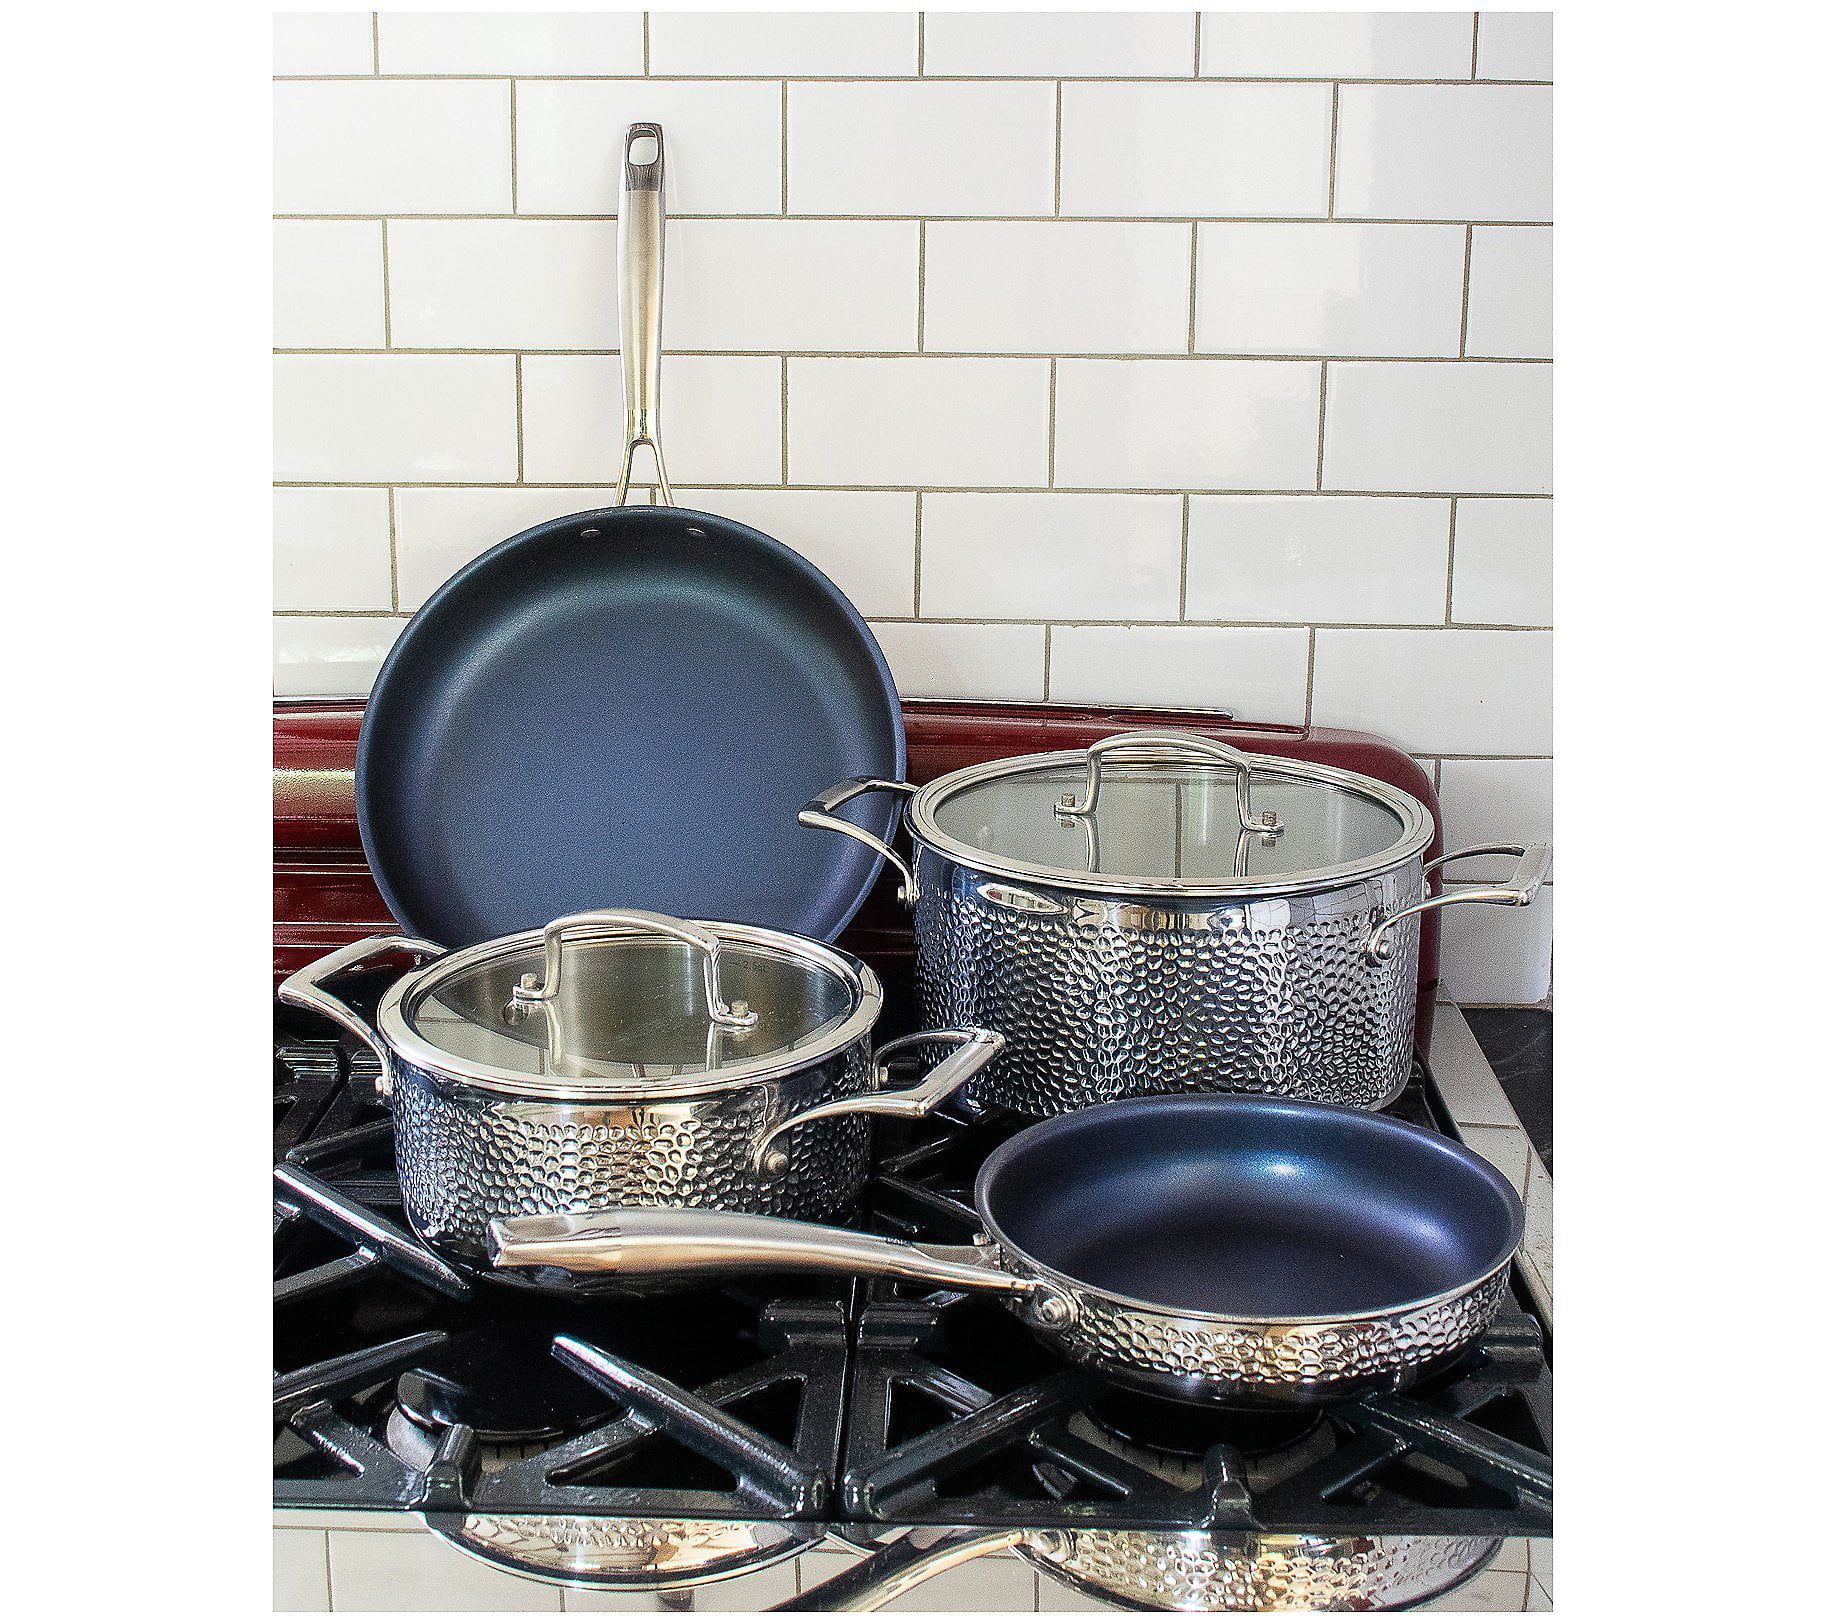  HexClad 7-Piece Hybrid Stainless Steel Cookware Set